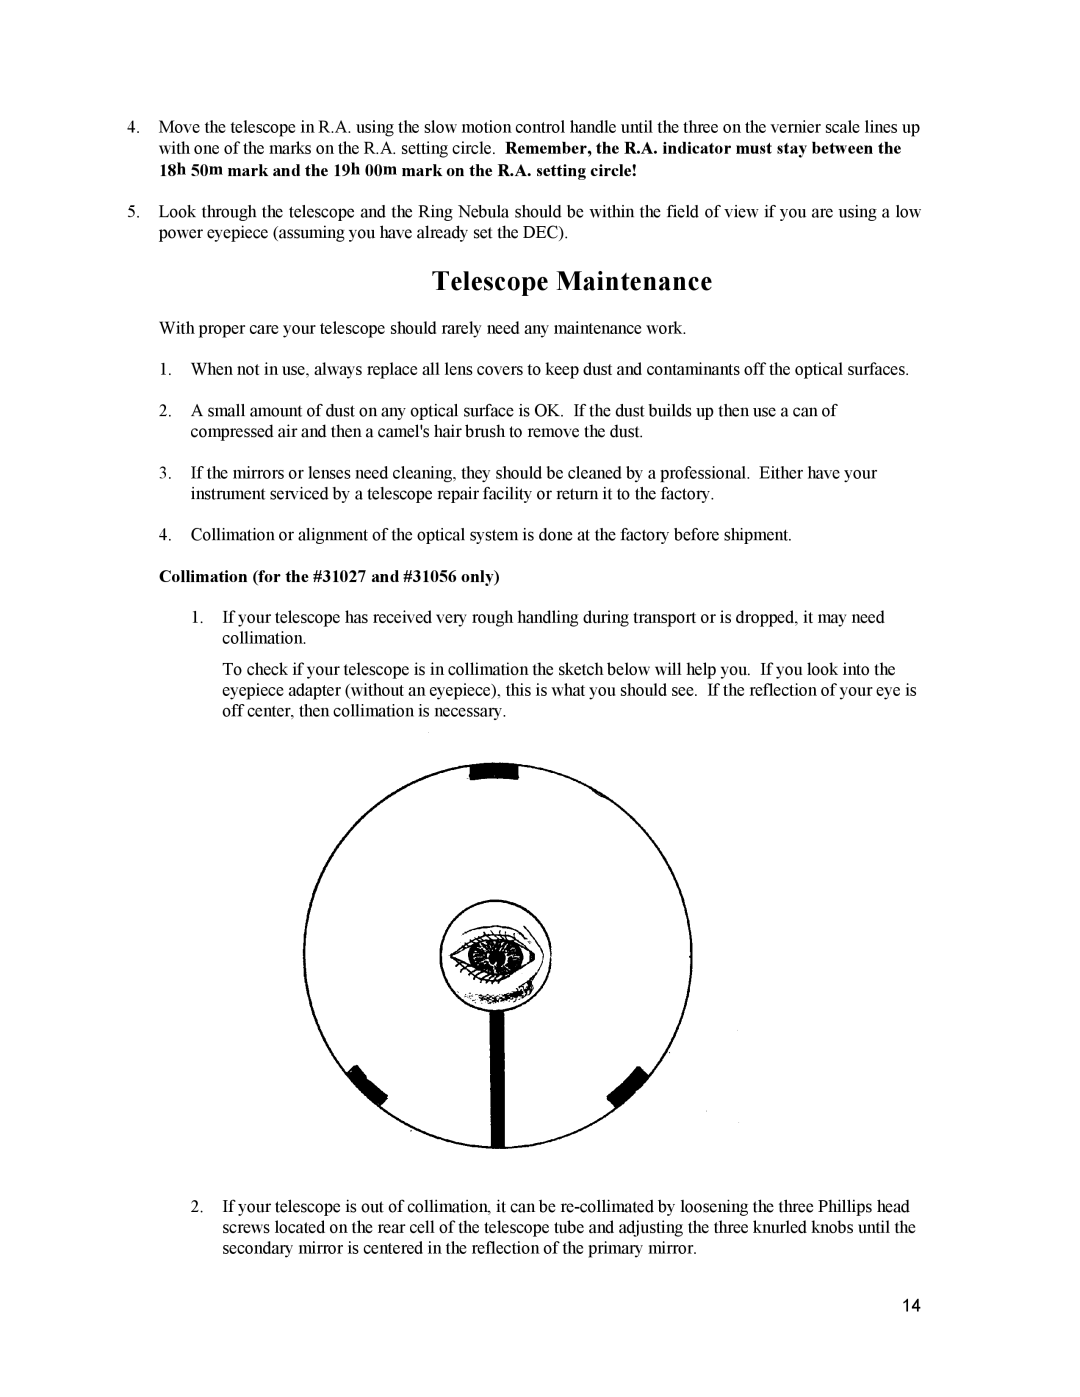 Celestron 91510 instruction manual Telescope Maintenance, Collimation for the #31027 and #31056 only 